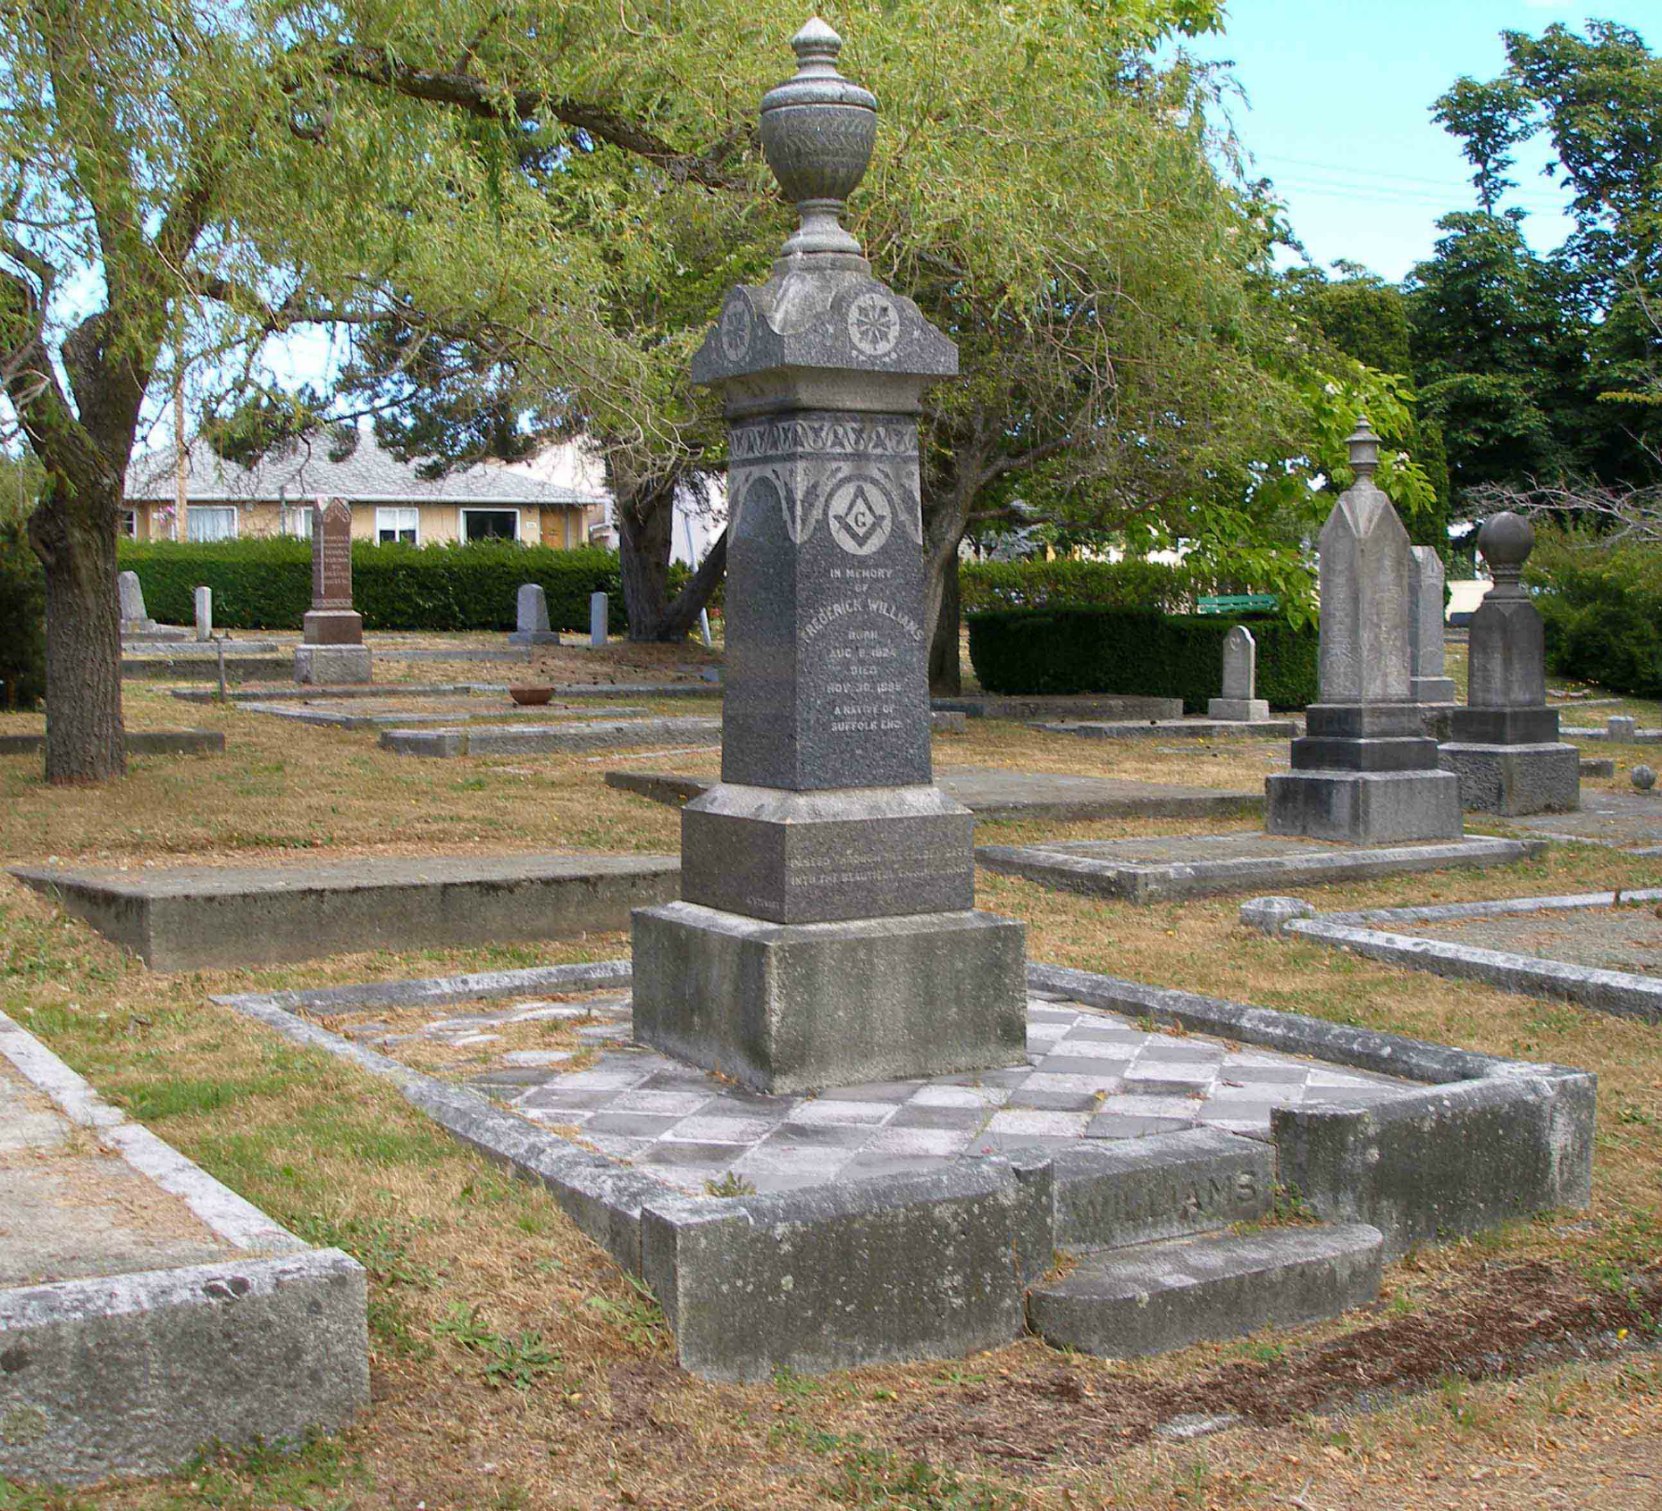 The grave of Frederick Williams, Past Grand Master, in Ross Bay Cemetery, Victoria, B.C.